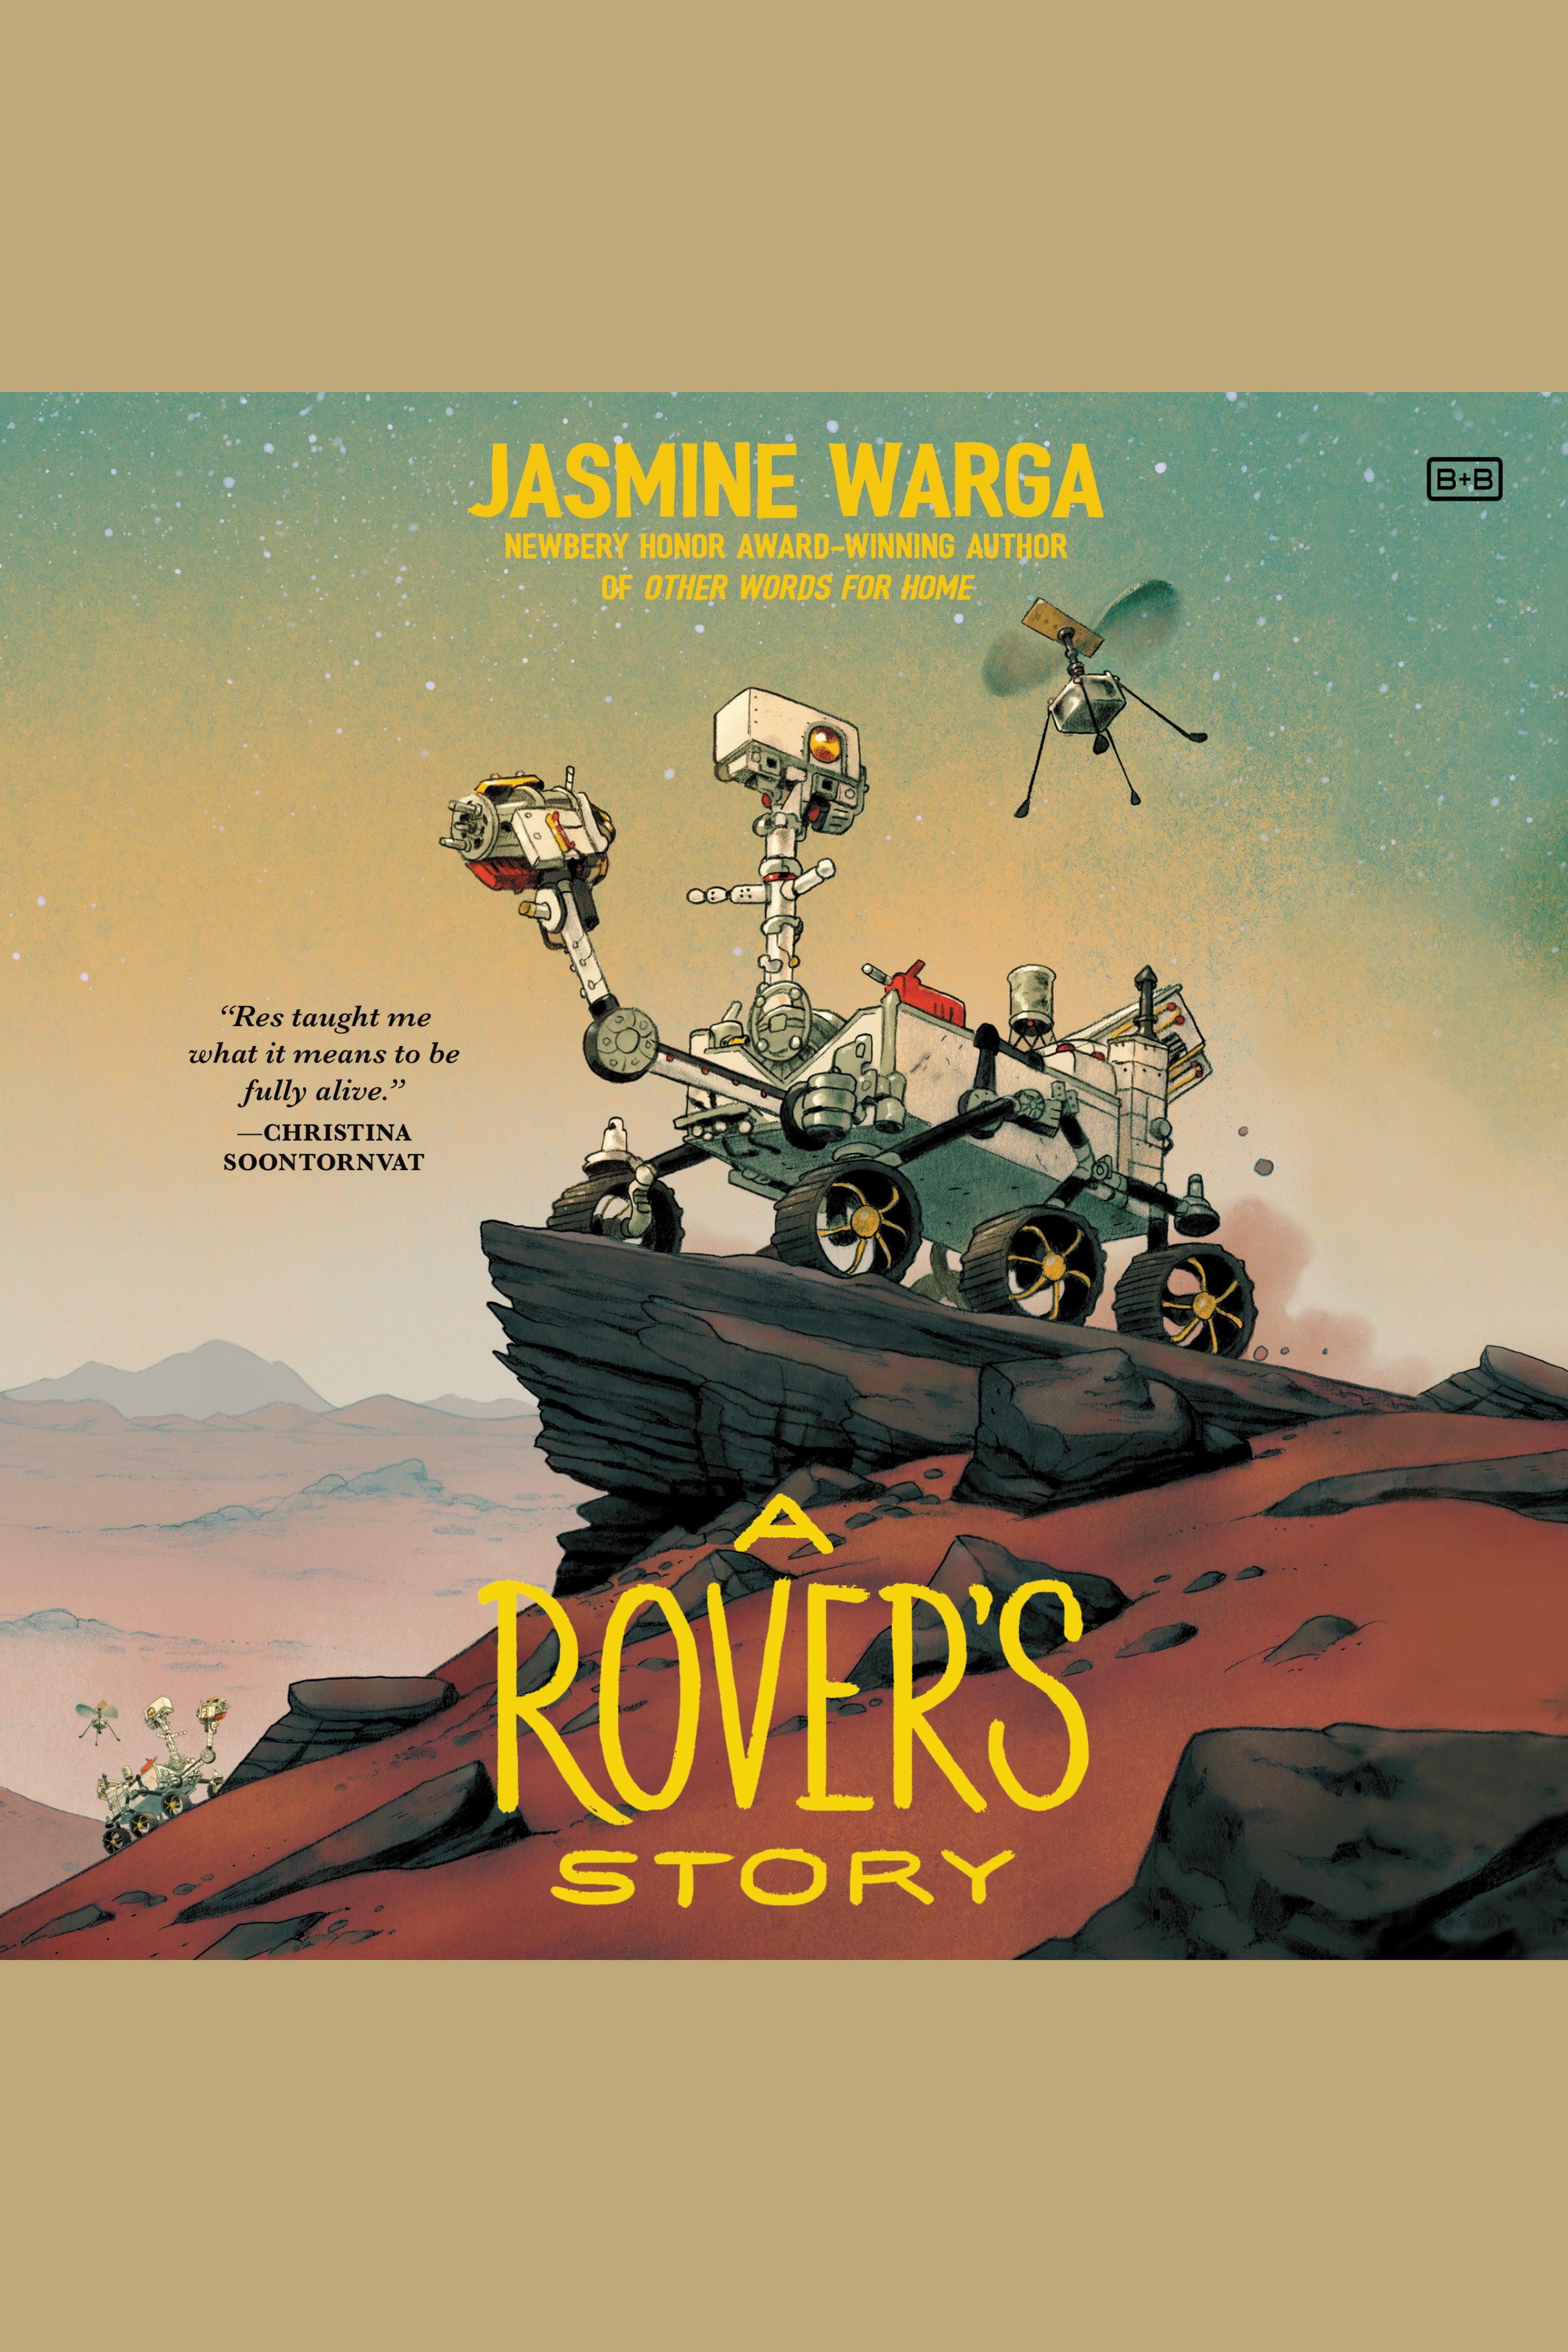 A Rover's Story cover image